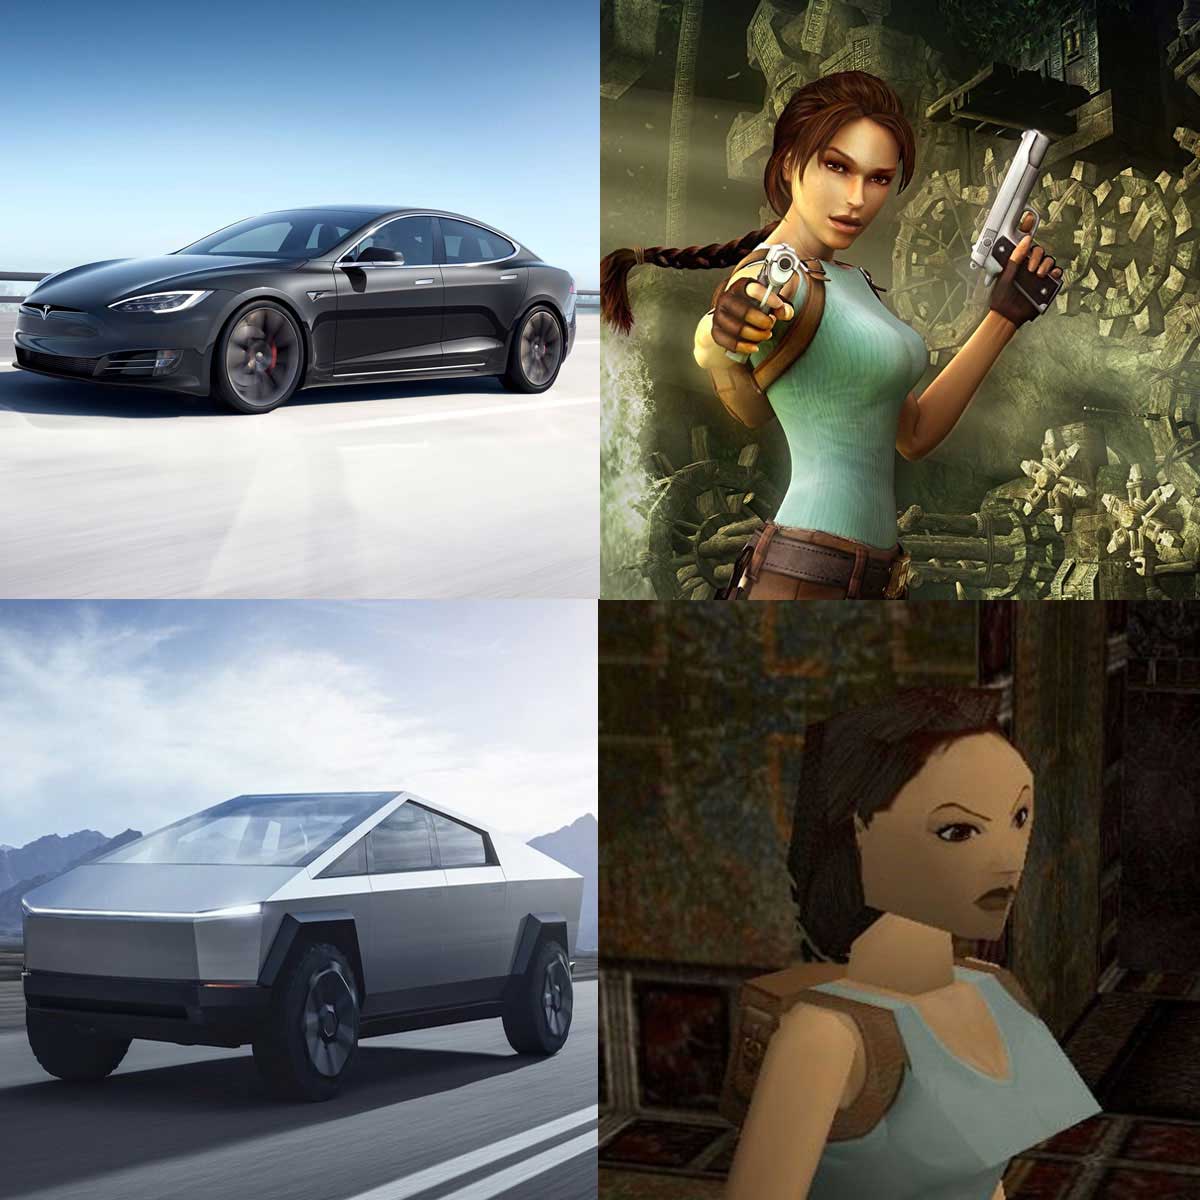 Photo of a Tesla sudan next to a high resolution rendering of Tomb Raider's Lara Croft and then a photo of a Tesla Cybertruck next to a low quality rendering of Lara Croft from the first Tomb Raider video game